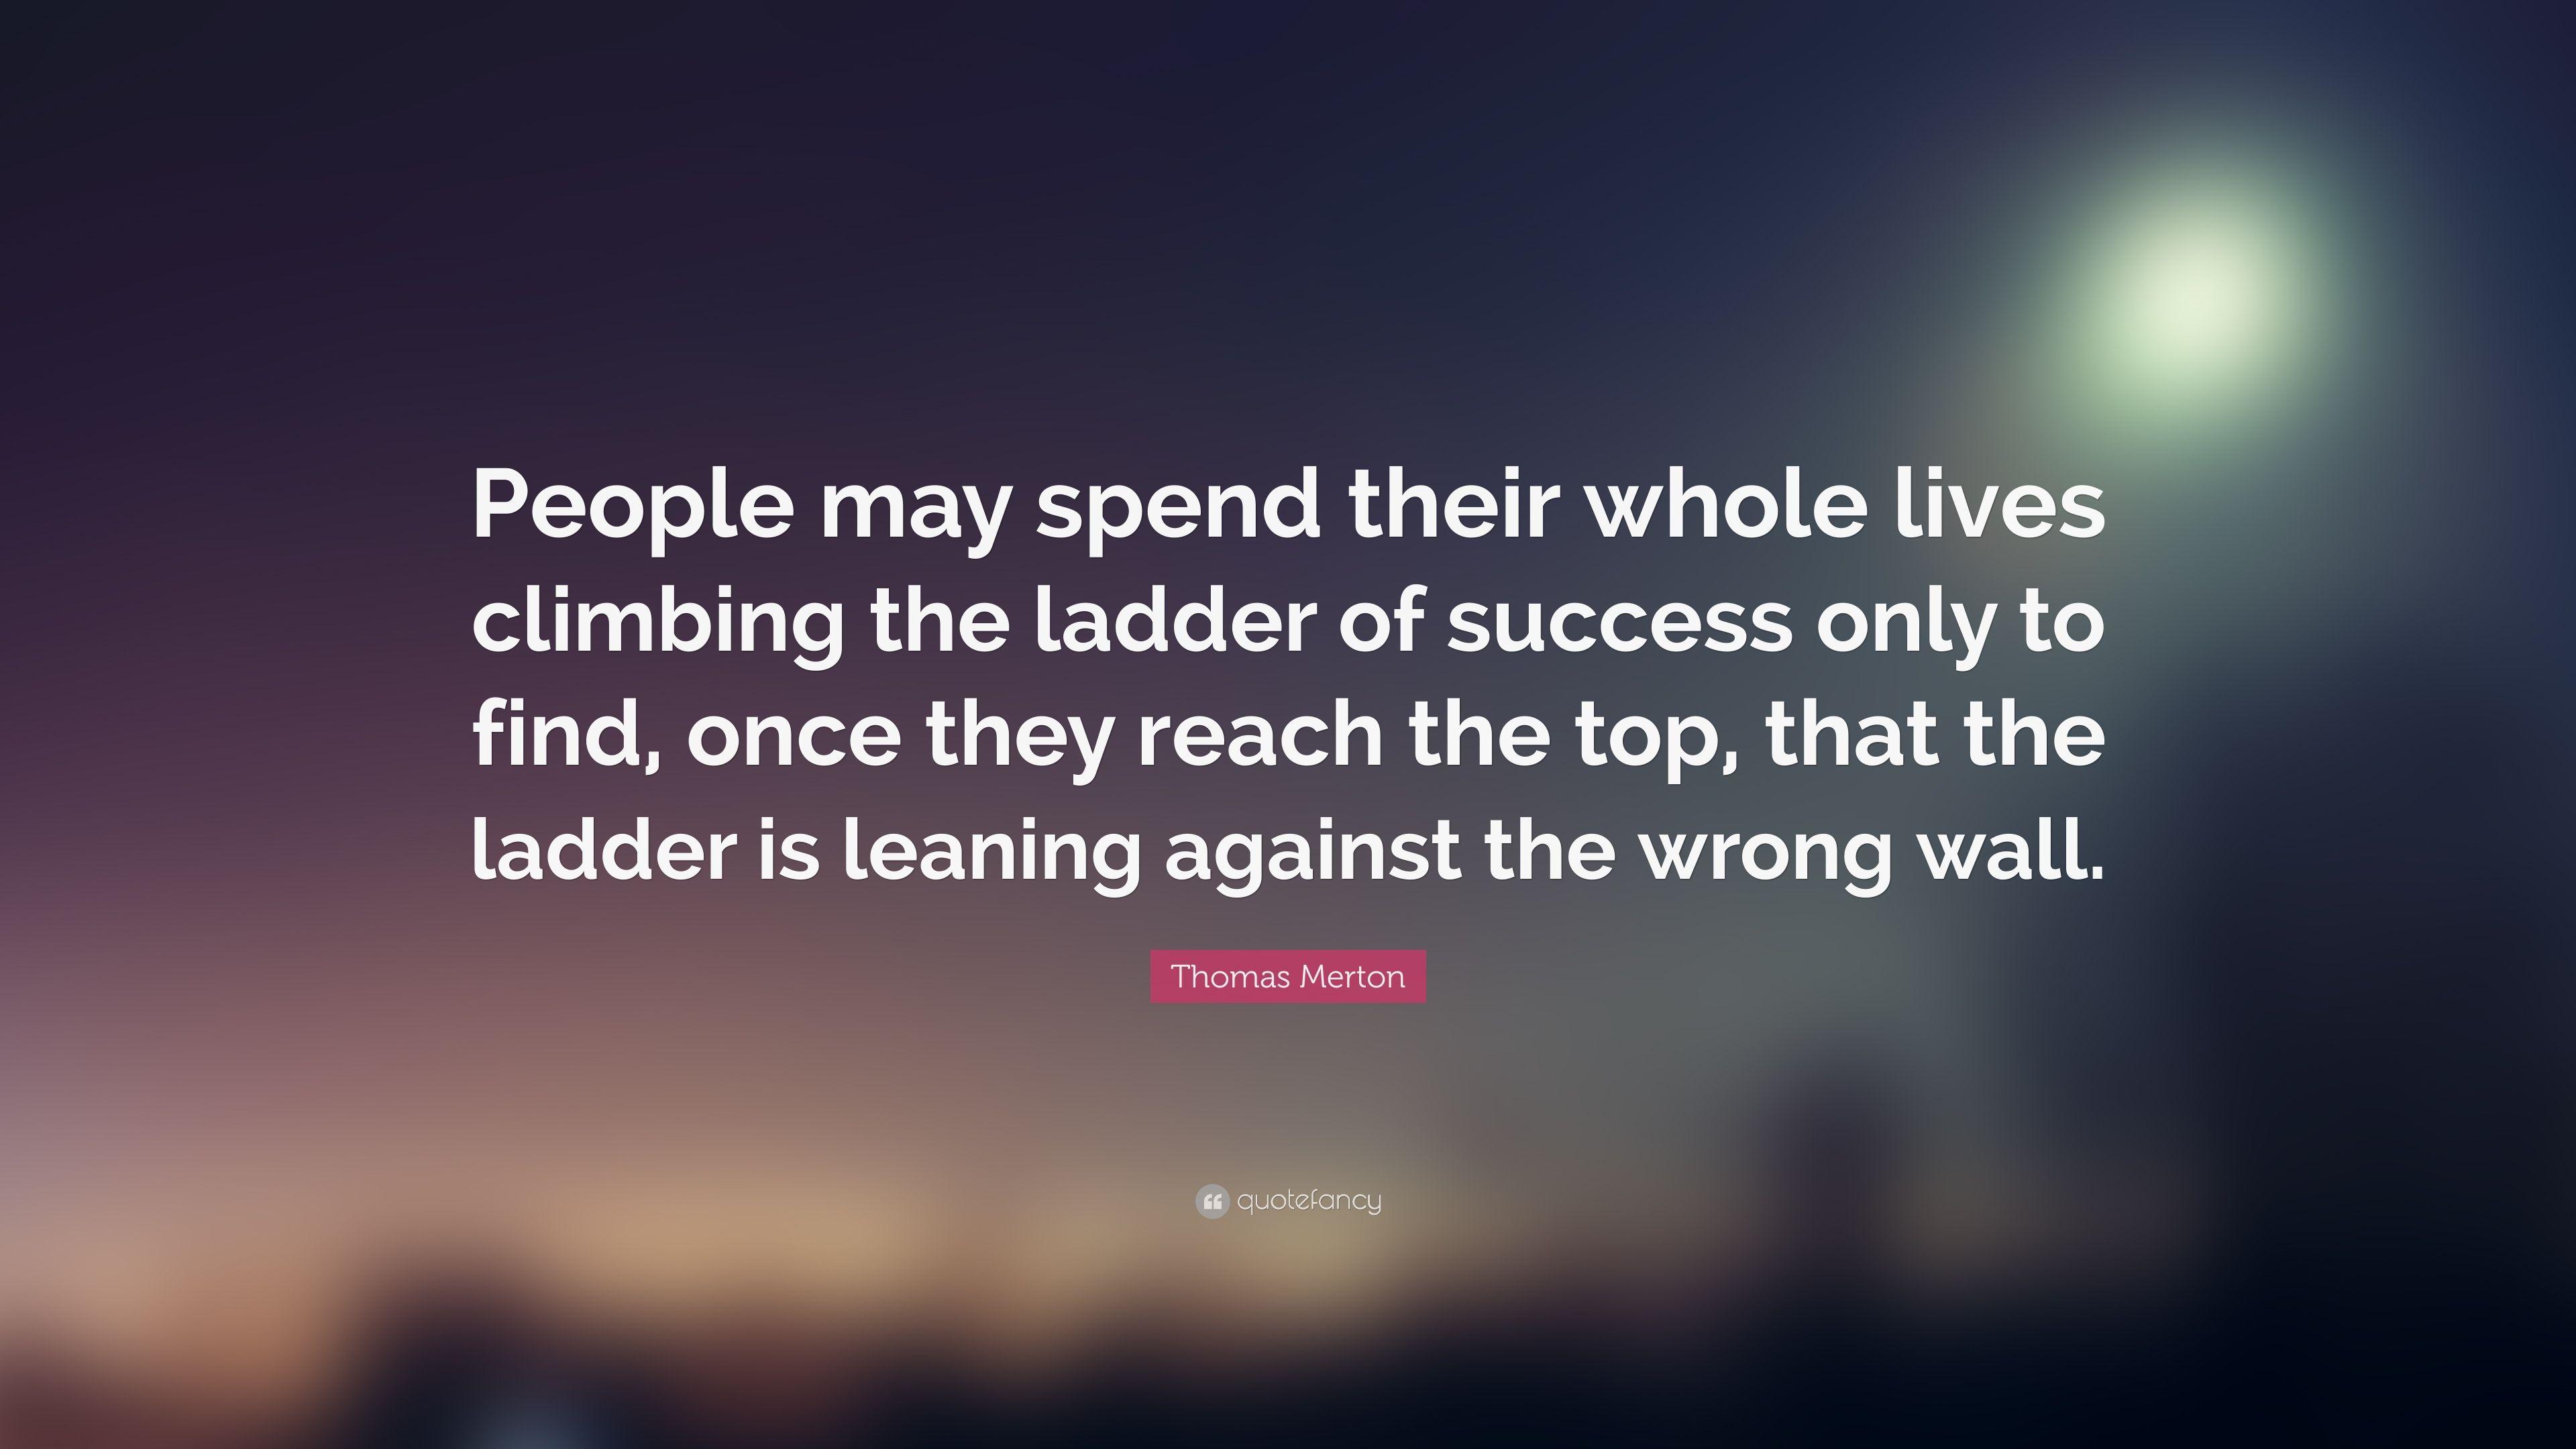 Thomas Merton Quote: “People may spend their whole lives climbing